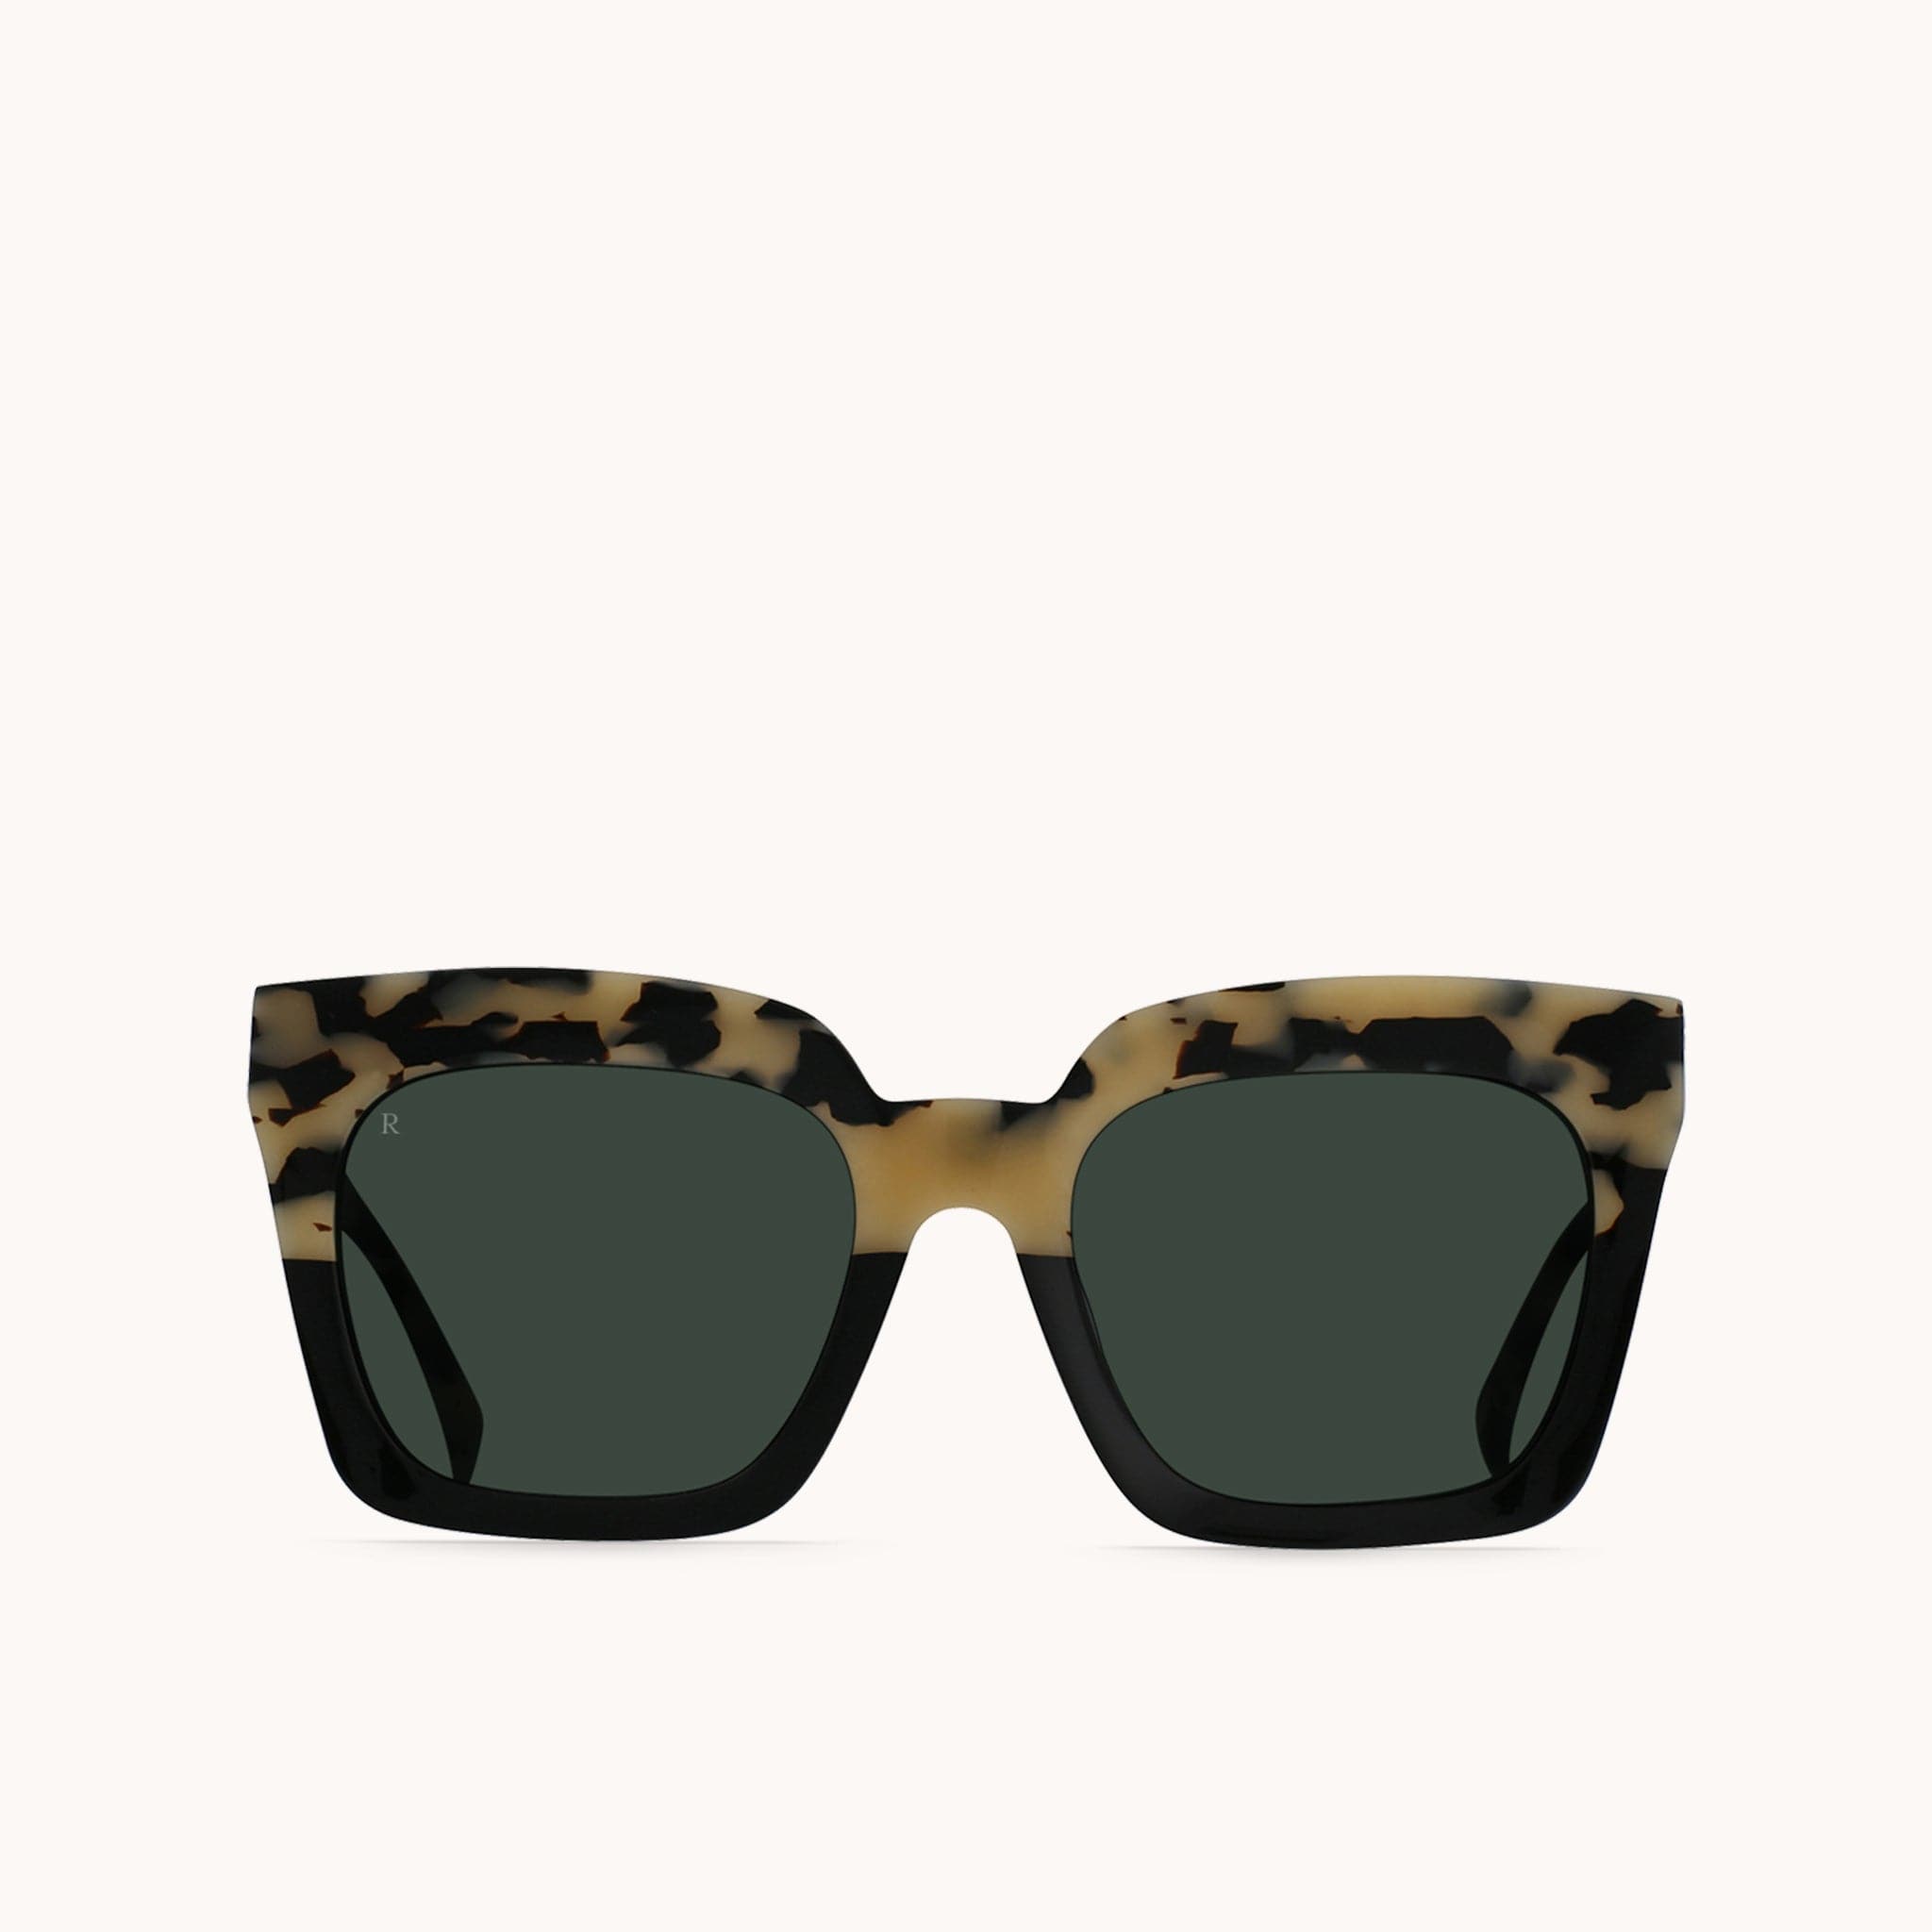 Sedona framed sunglasses with two-toned tortoise and solid black frames made of high quality acetate. These glasses have a distinct, oversized look from their thick frames and round, squared and dark smoke toned lenses.